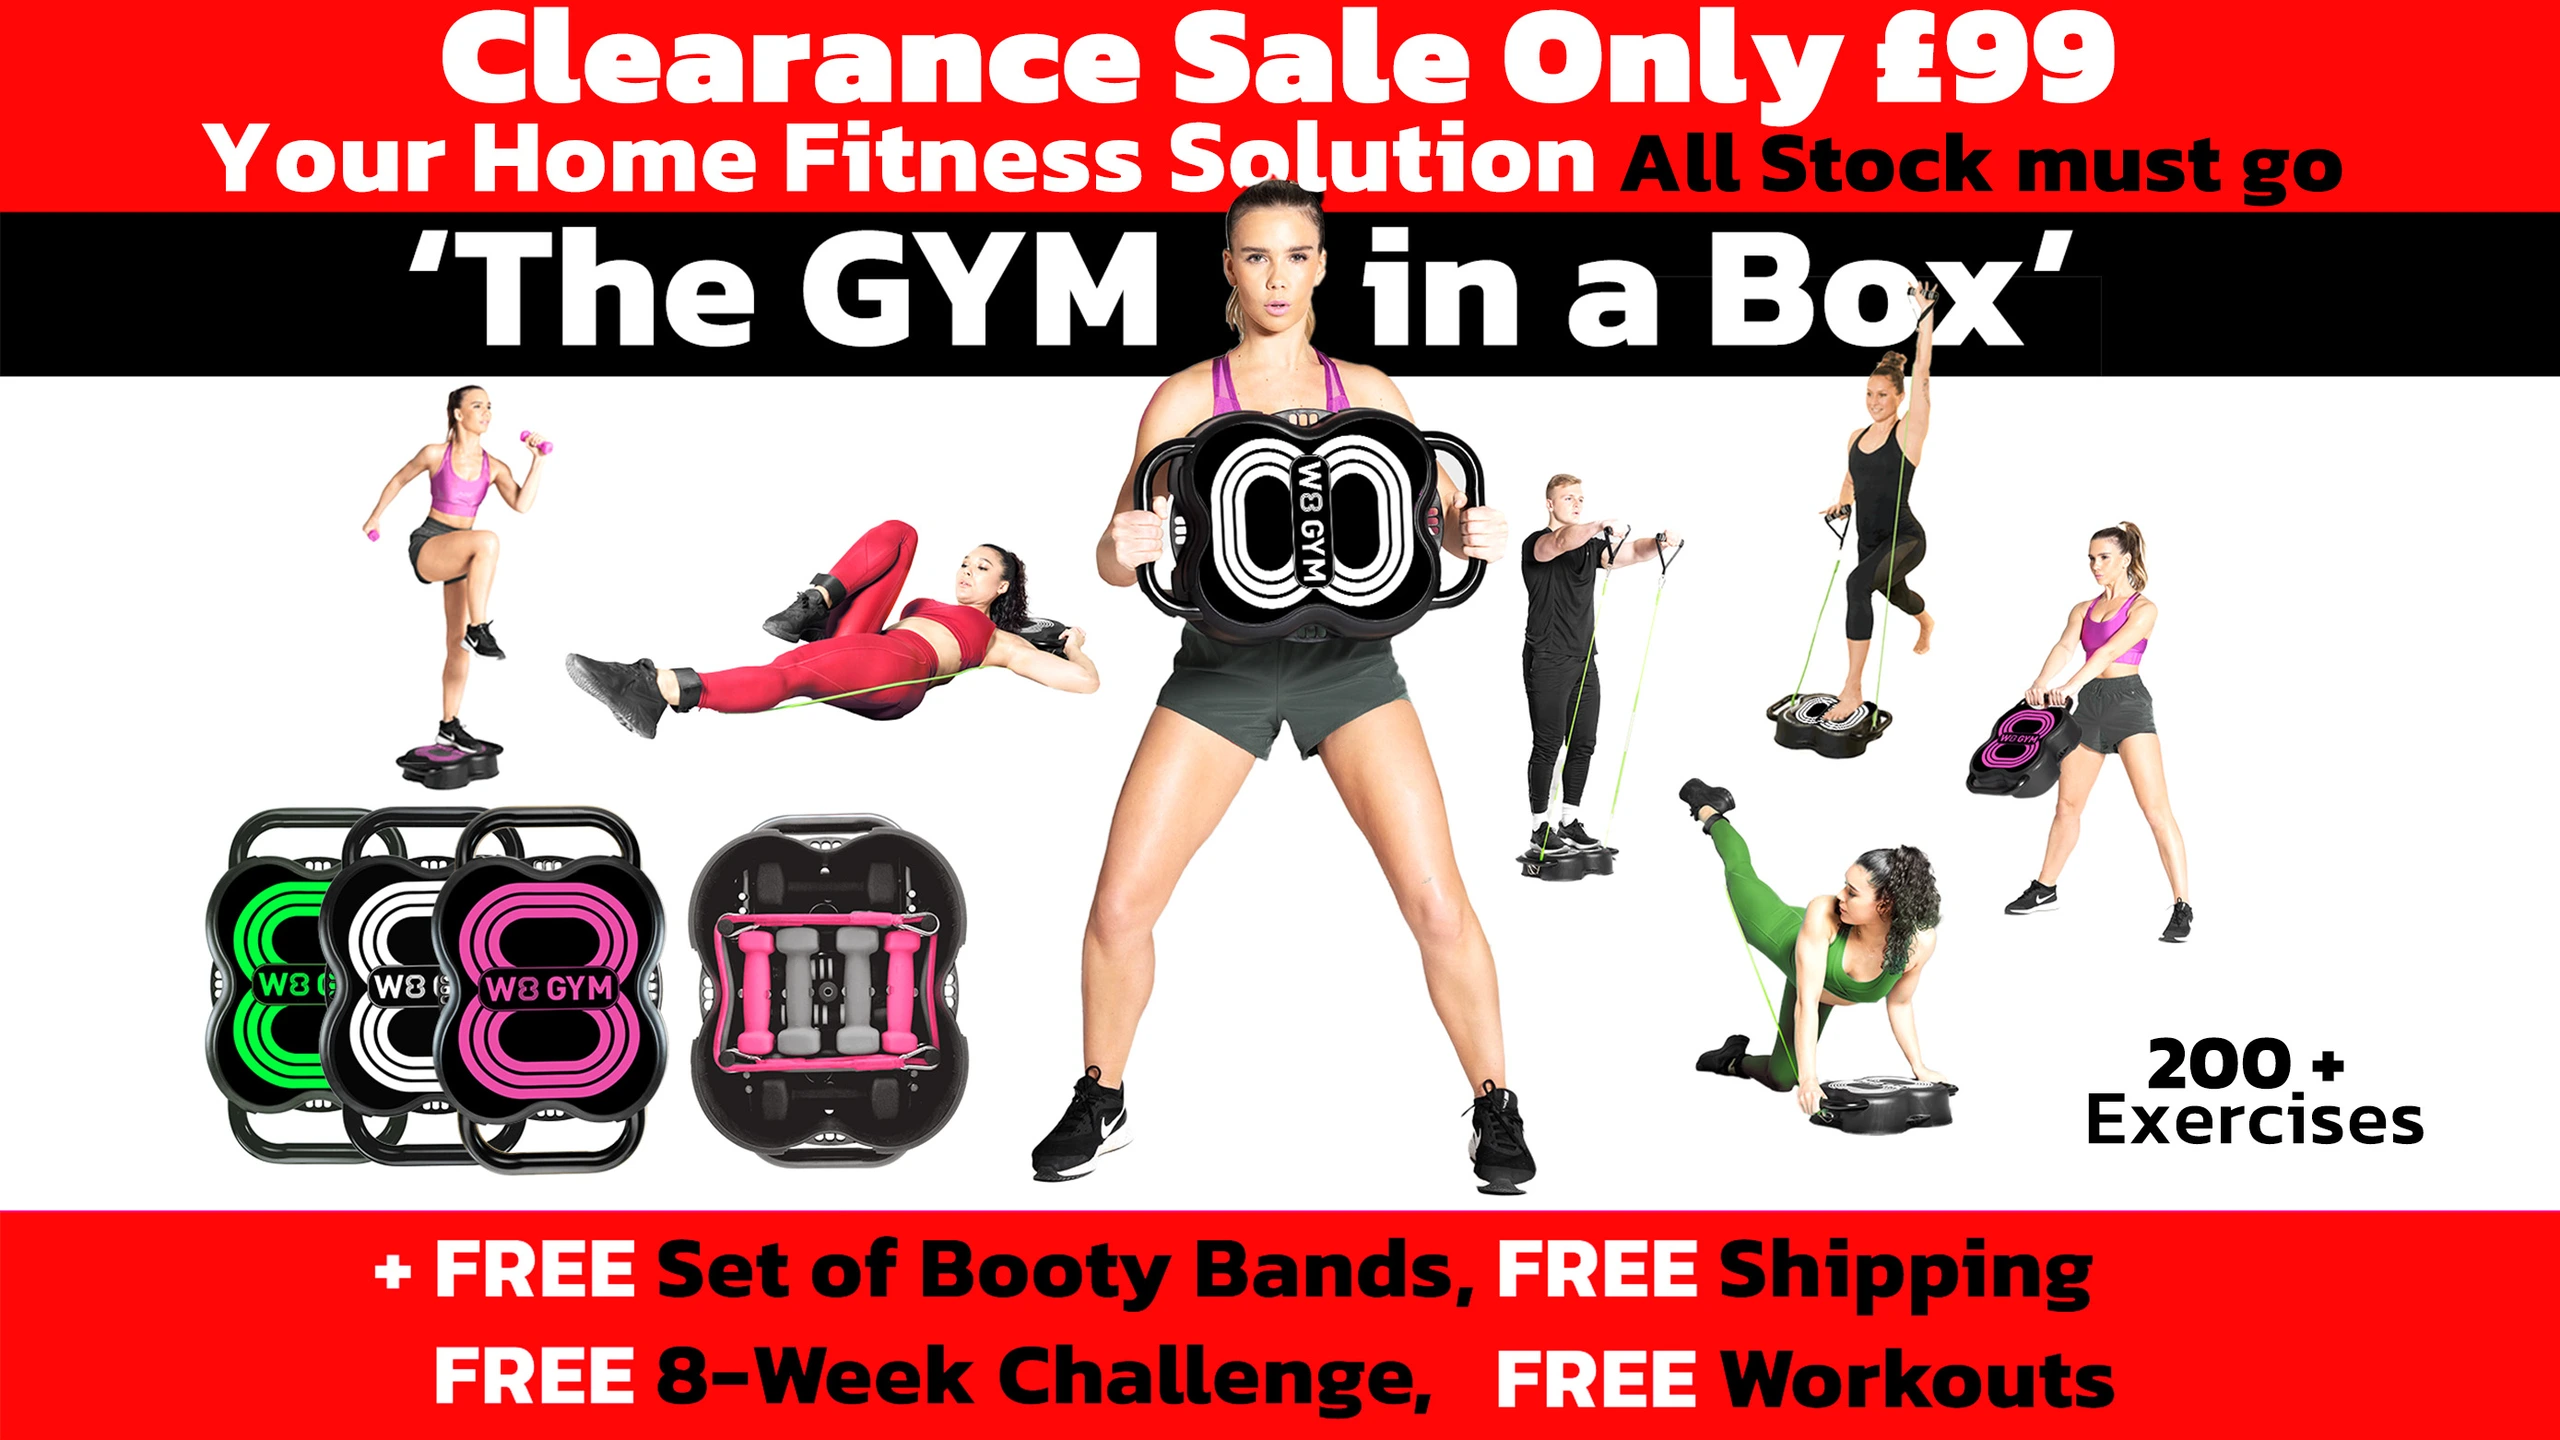 Clearance 16 to 9 - W8 GYM